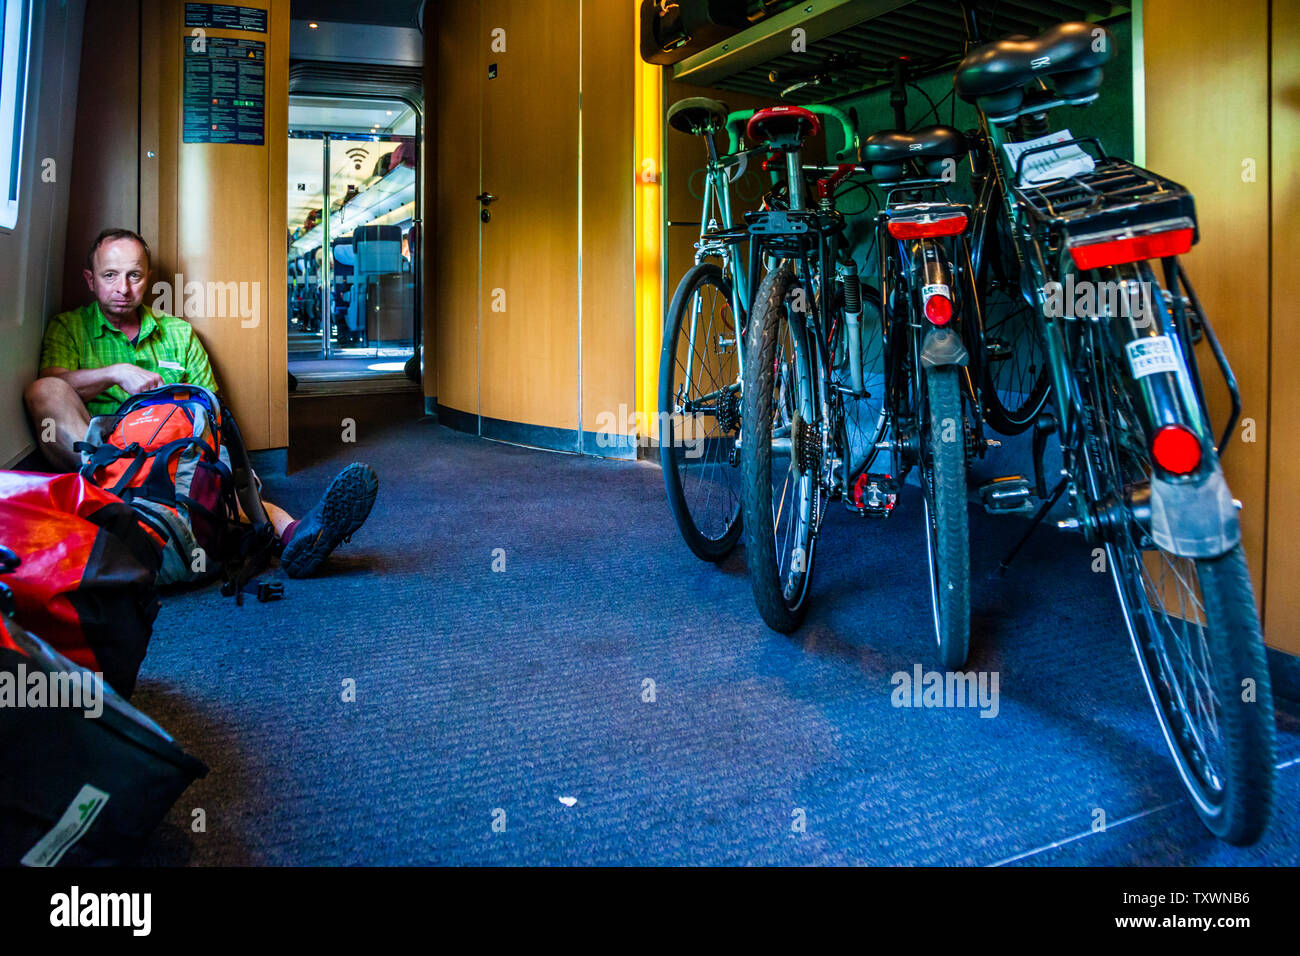 Bicycle traveler in the Intercity Stock Photo